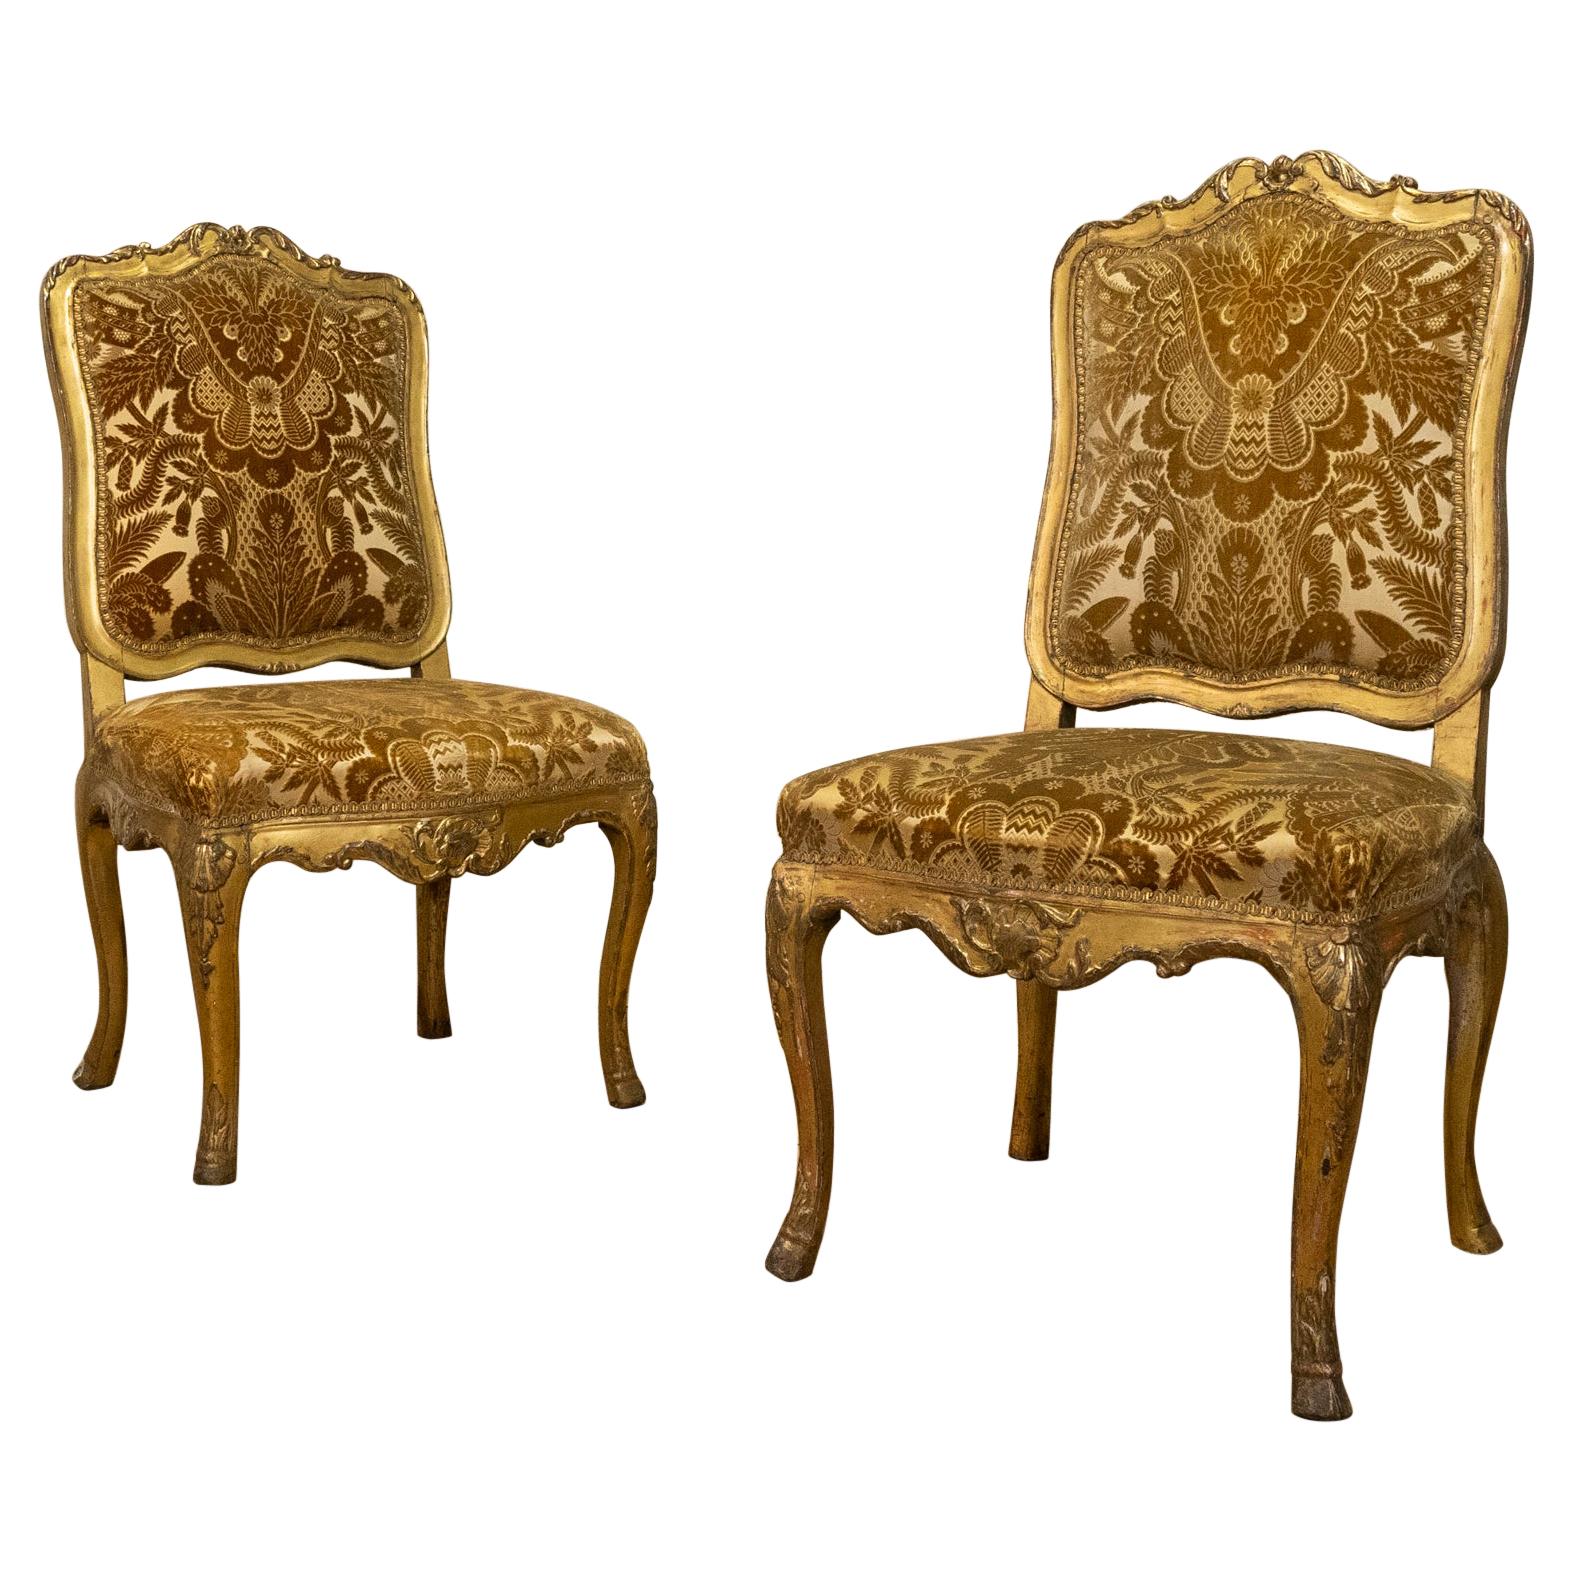 Pair of 18th Century French Louis XV Giltwood Side Chairs Upholstered - Gold  For Sale